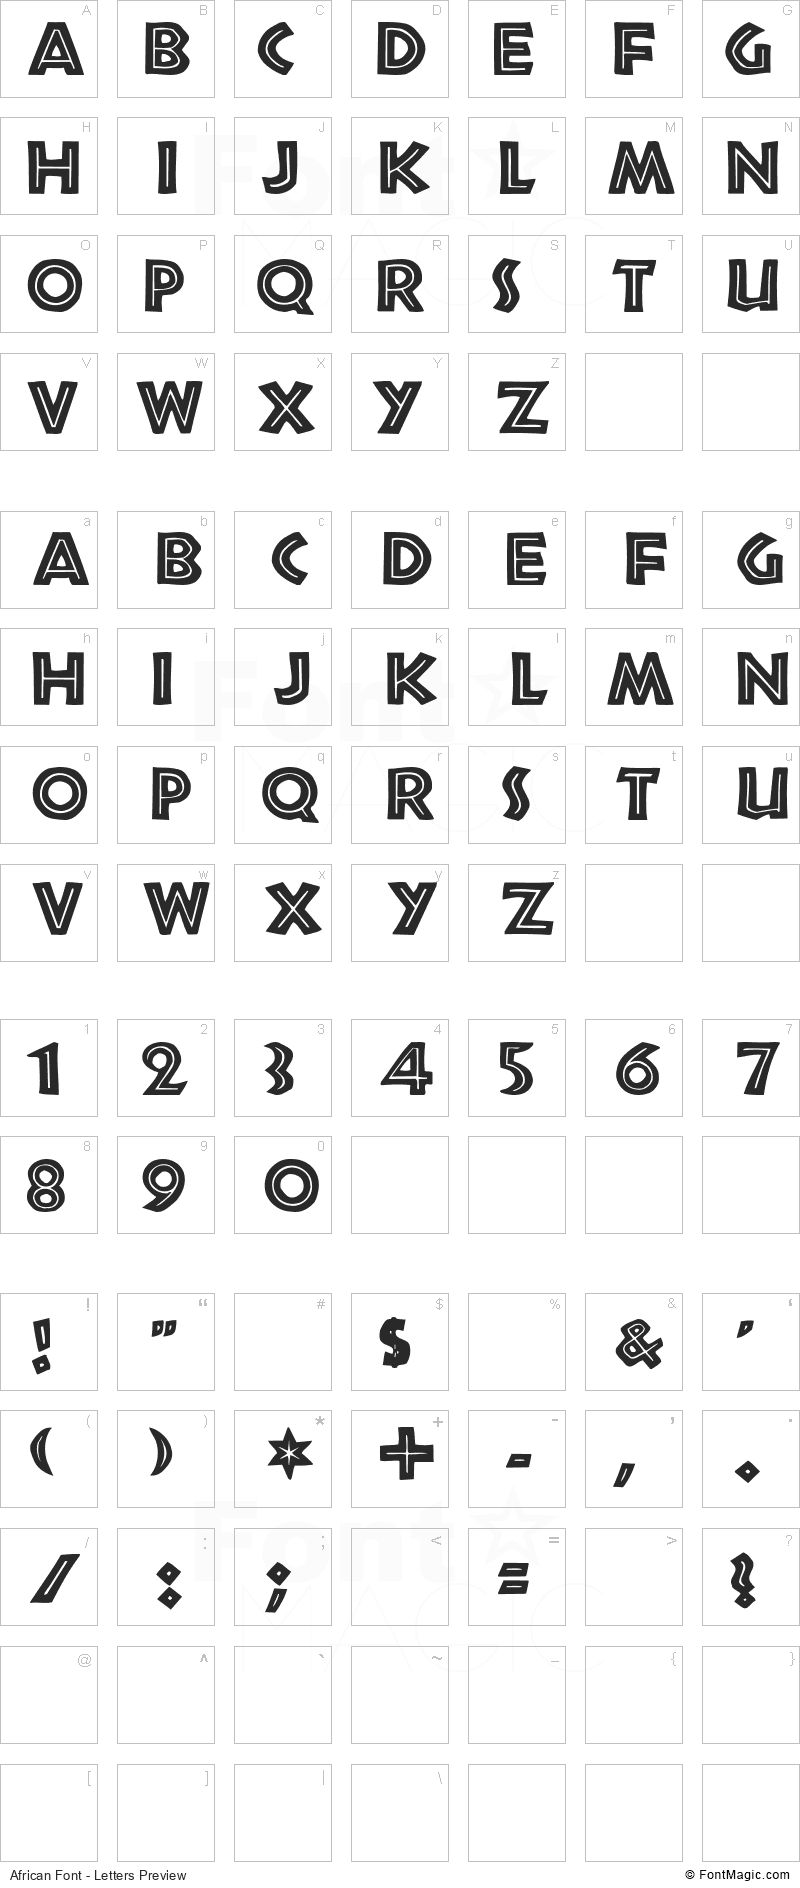 African Font - All Latters Preview Chart